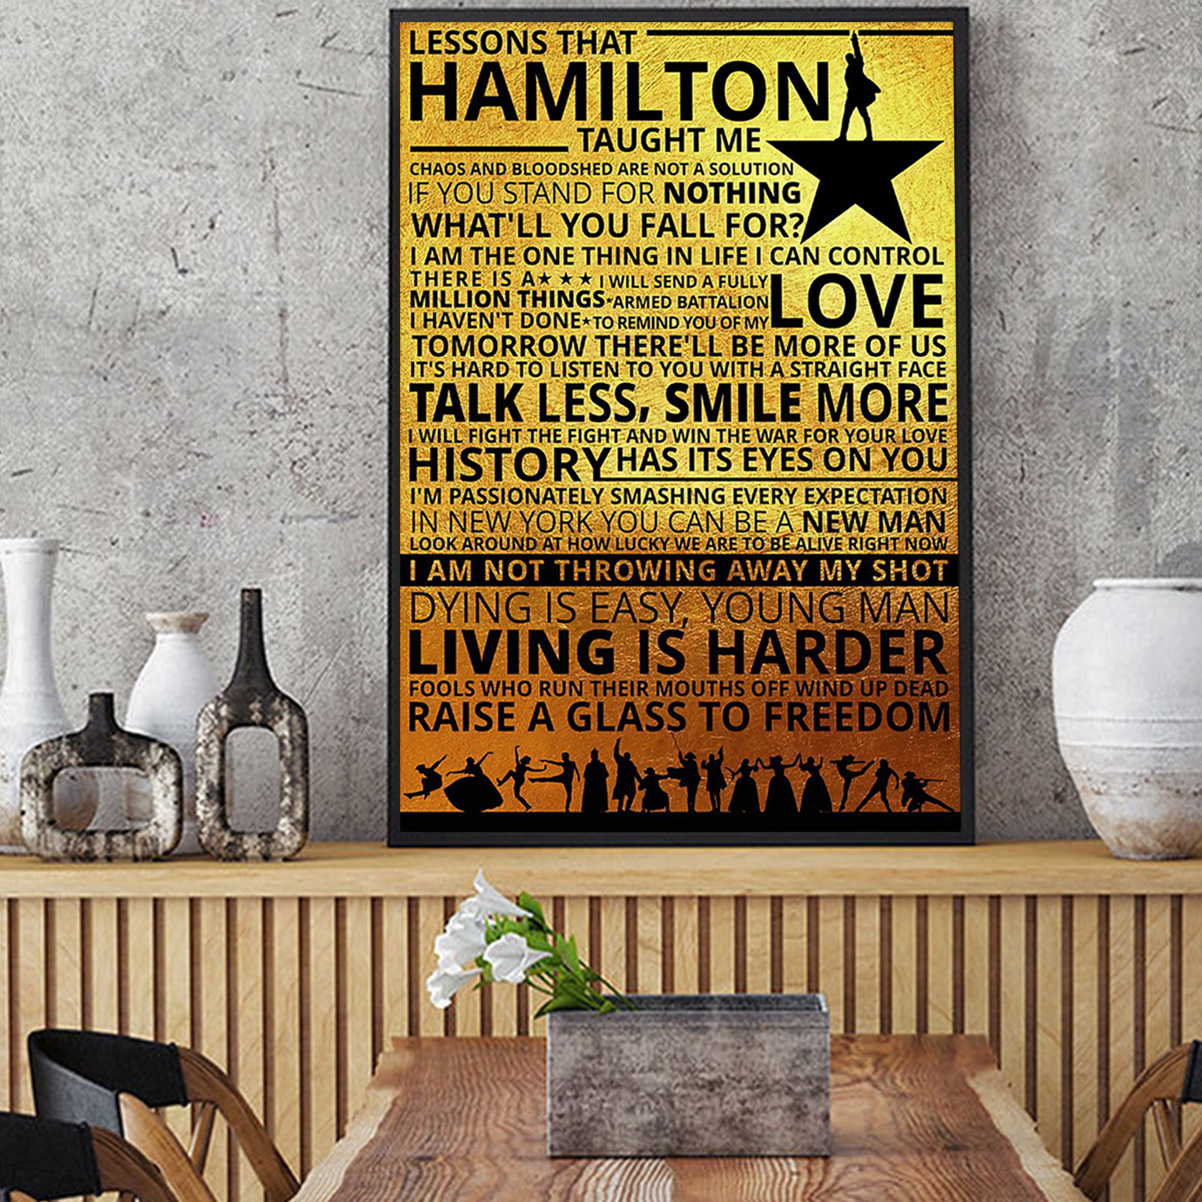 Lessons hamilton taught me poster A3